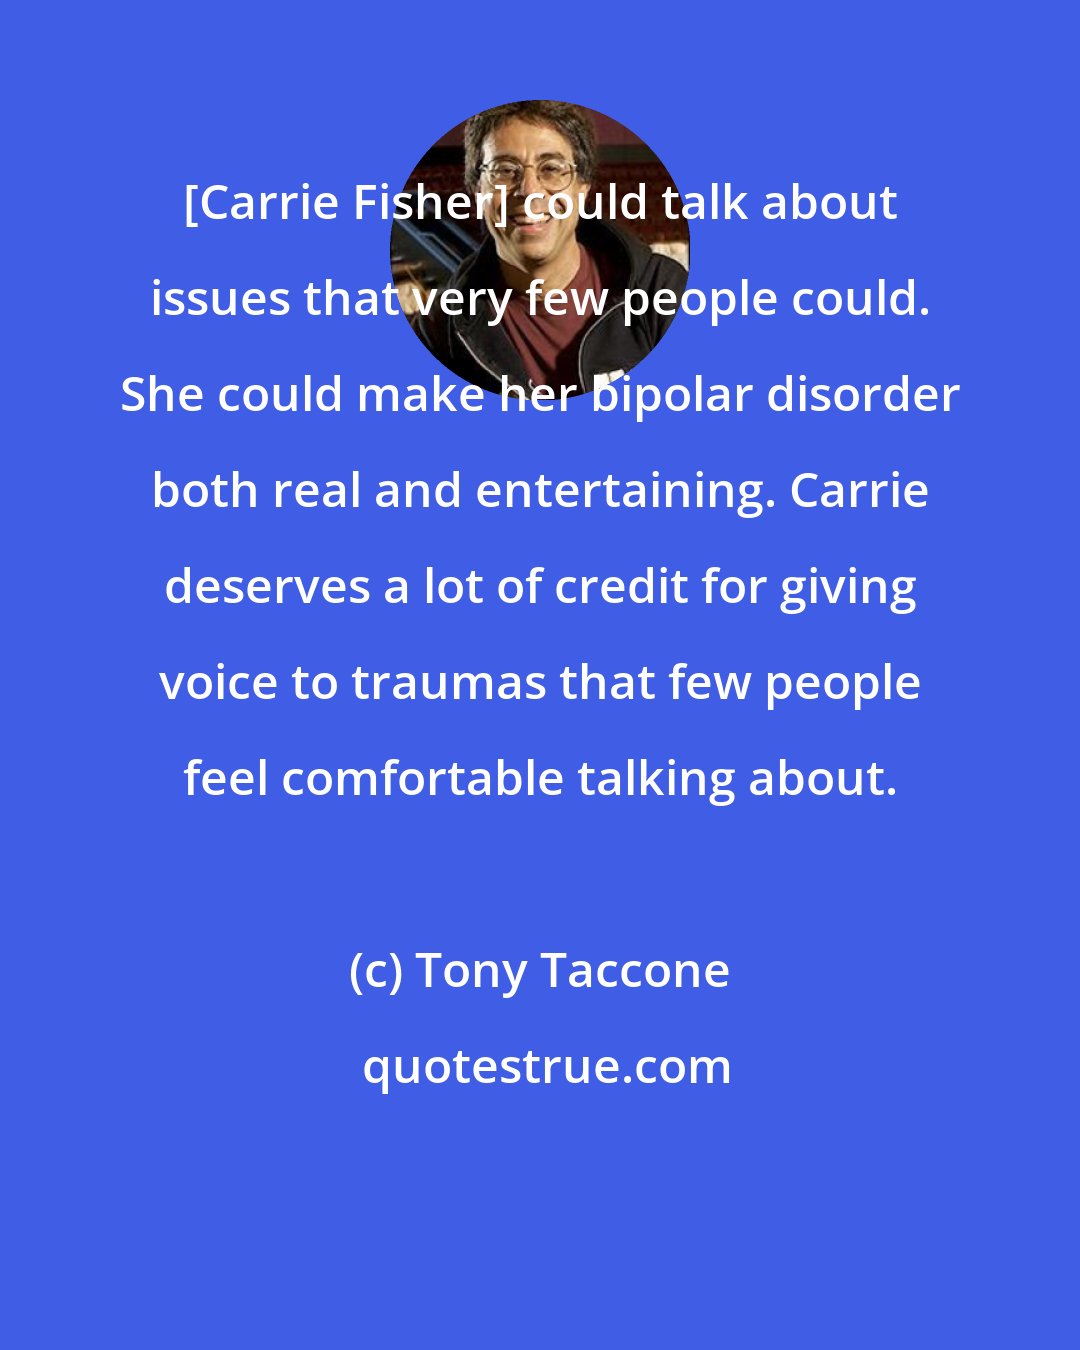 Tony Taccone: [Carrie Fisher] could talk about issues that very few people could. She could make her bipolar disorder both real and entertaining. Carrie deserves a lot of credit for giving voice to traumas that few people feel comfortable talking about.